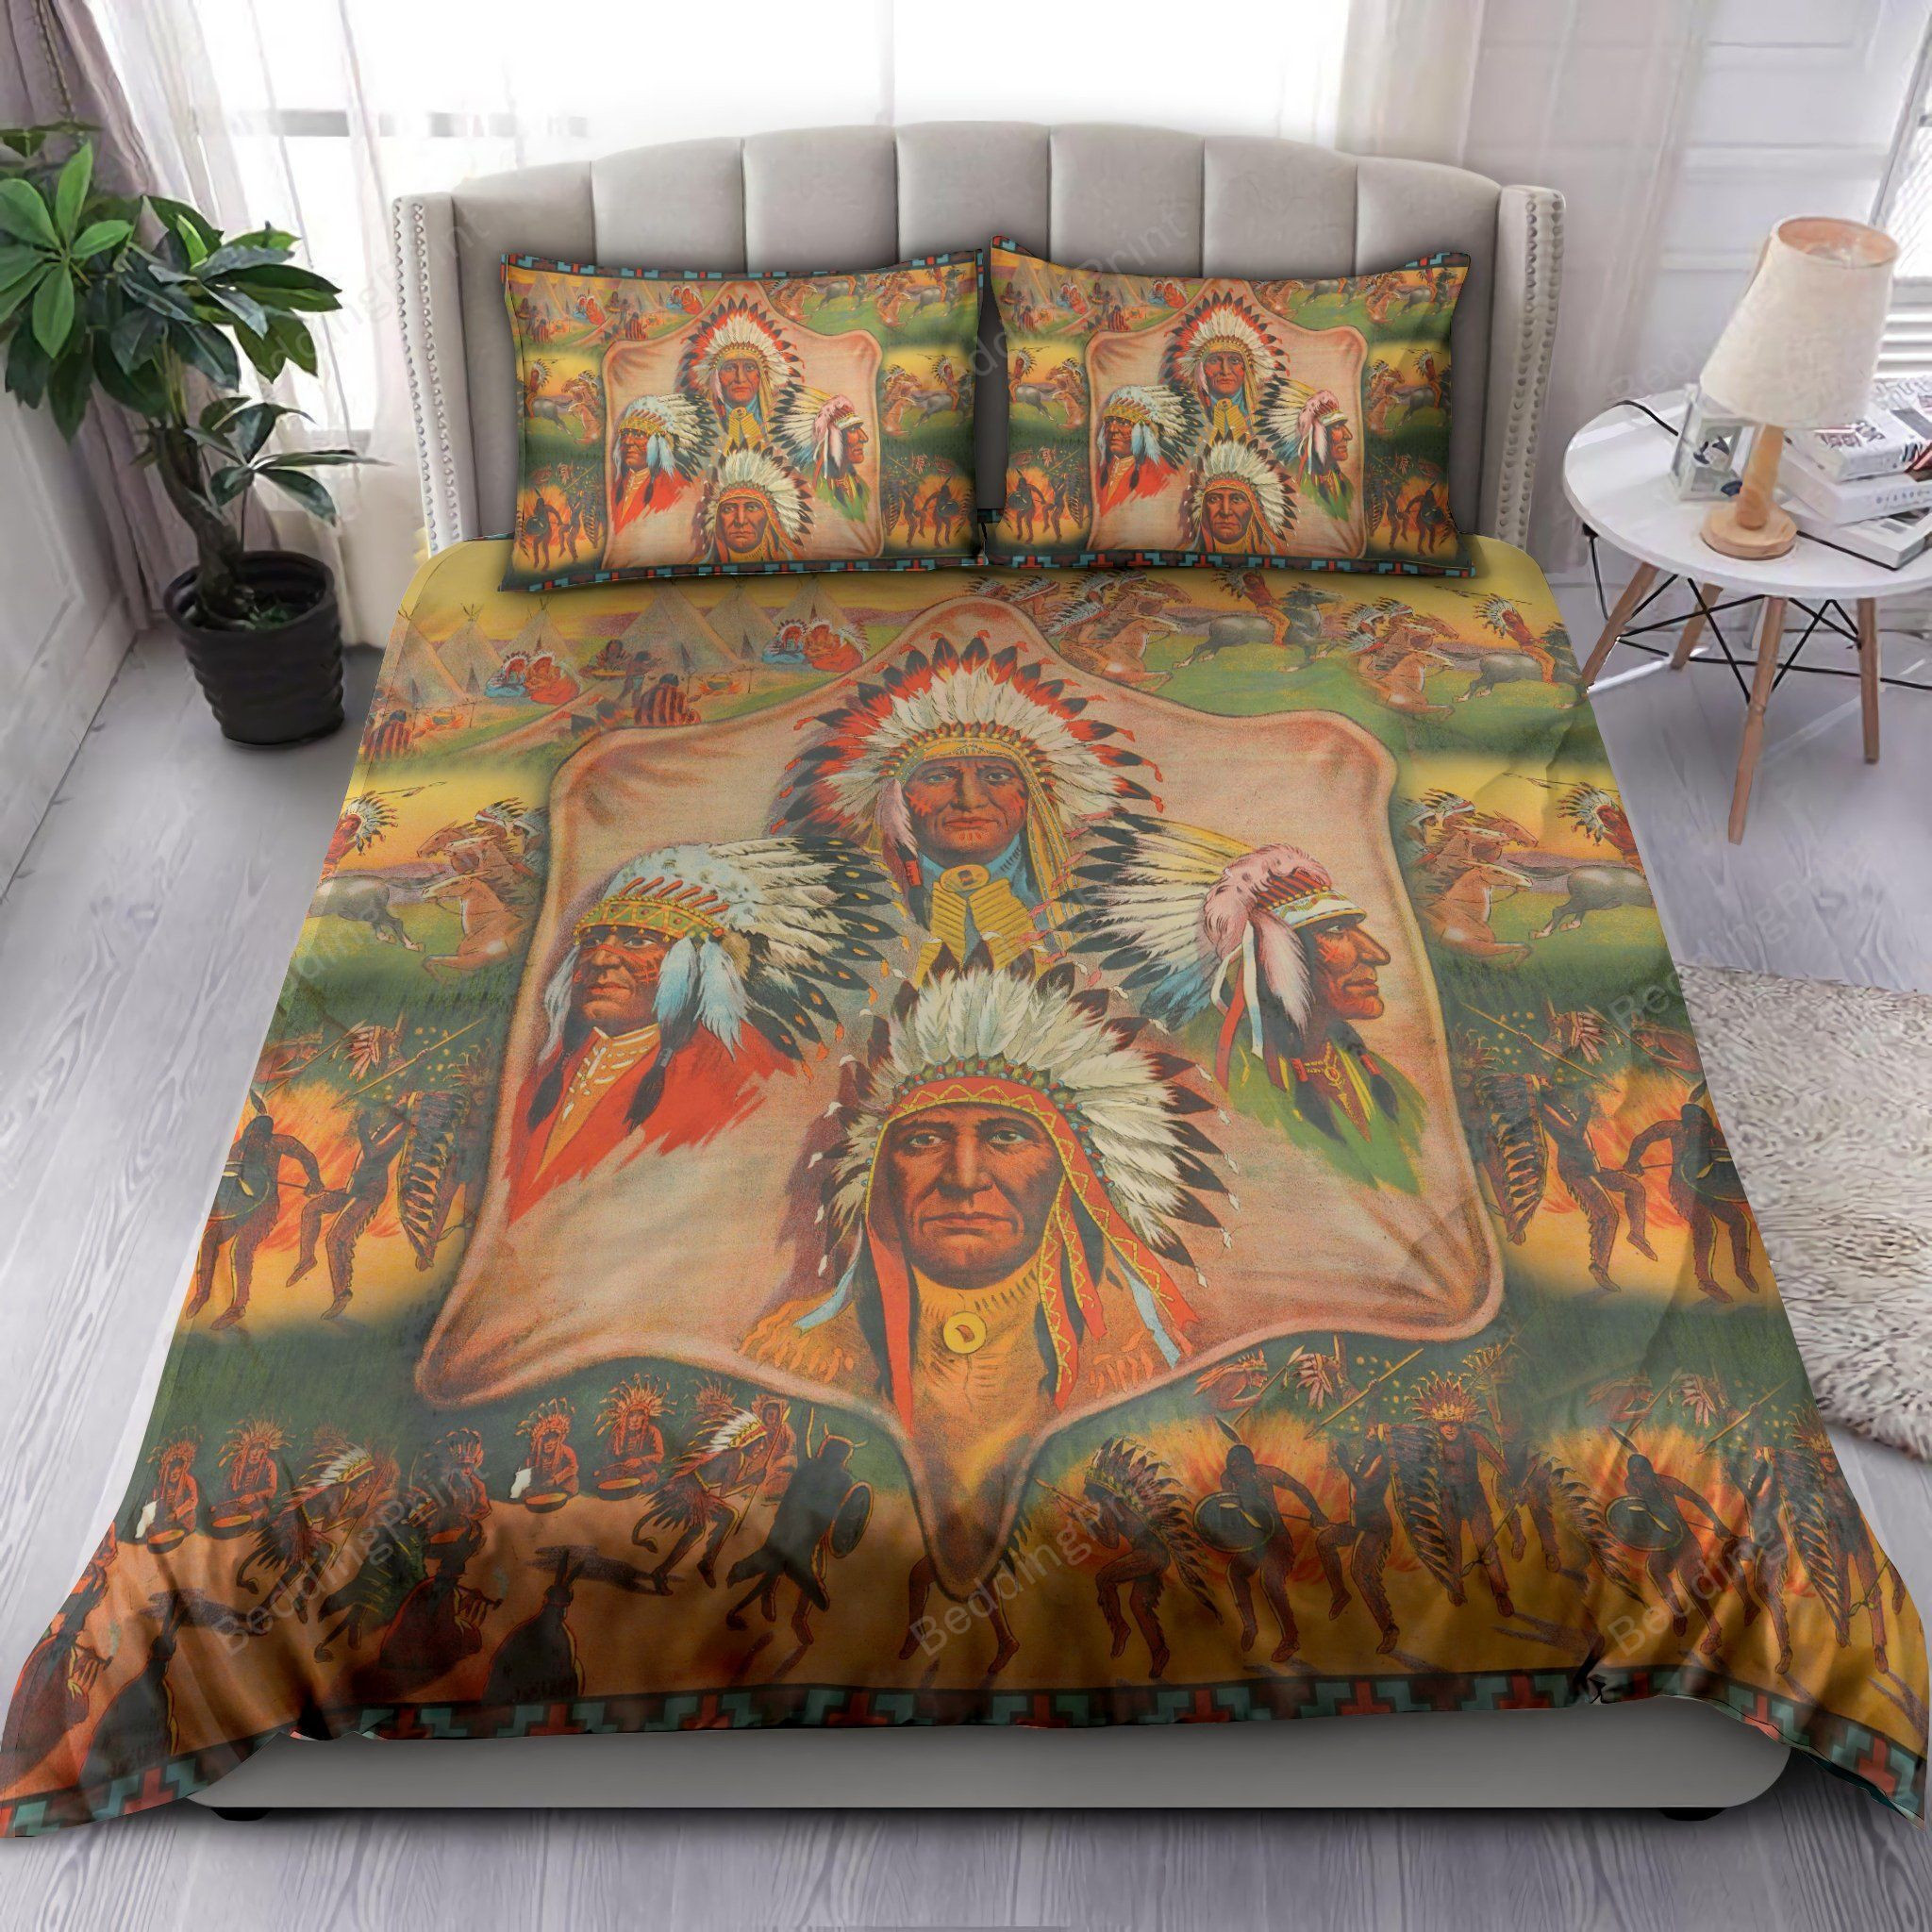 Native American Bed Sheets Duvet Cover Bedding Sets. PLEASE NOTE: This ...